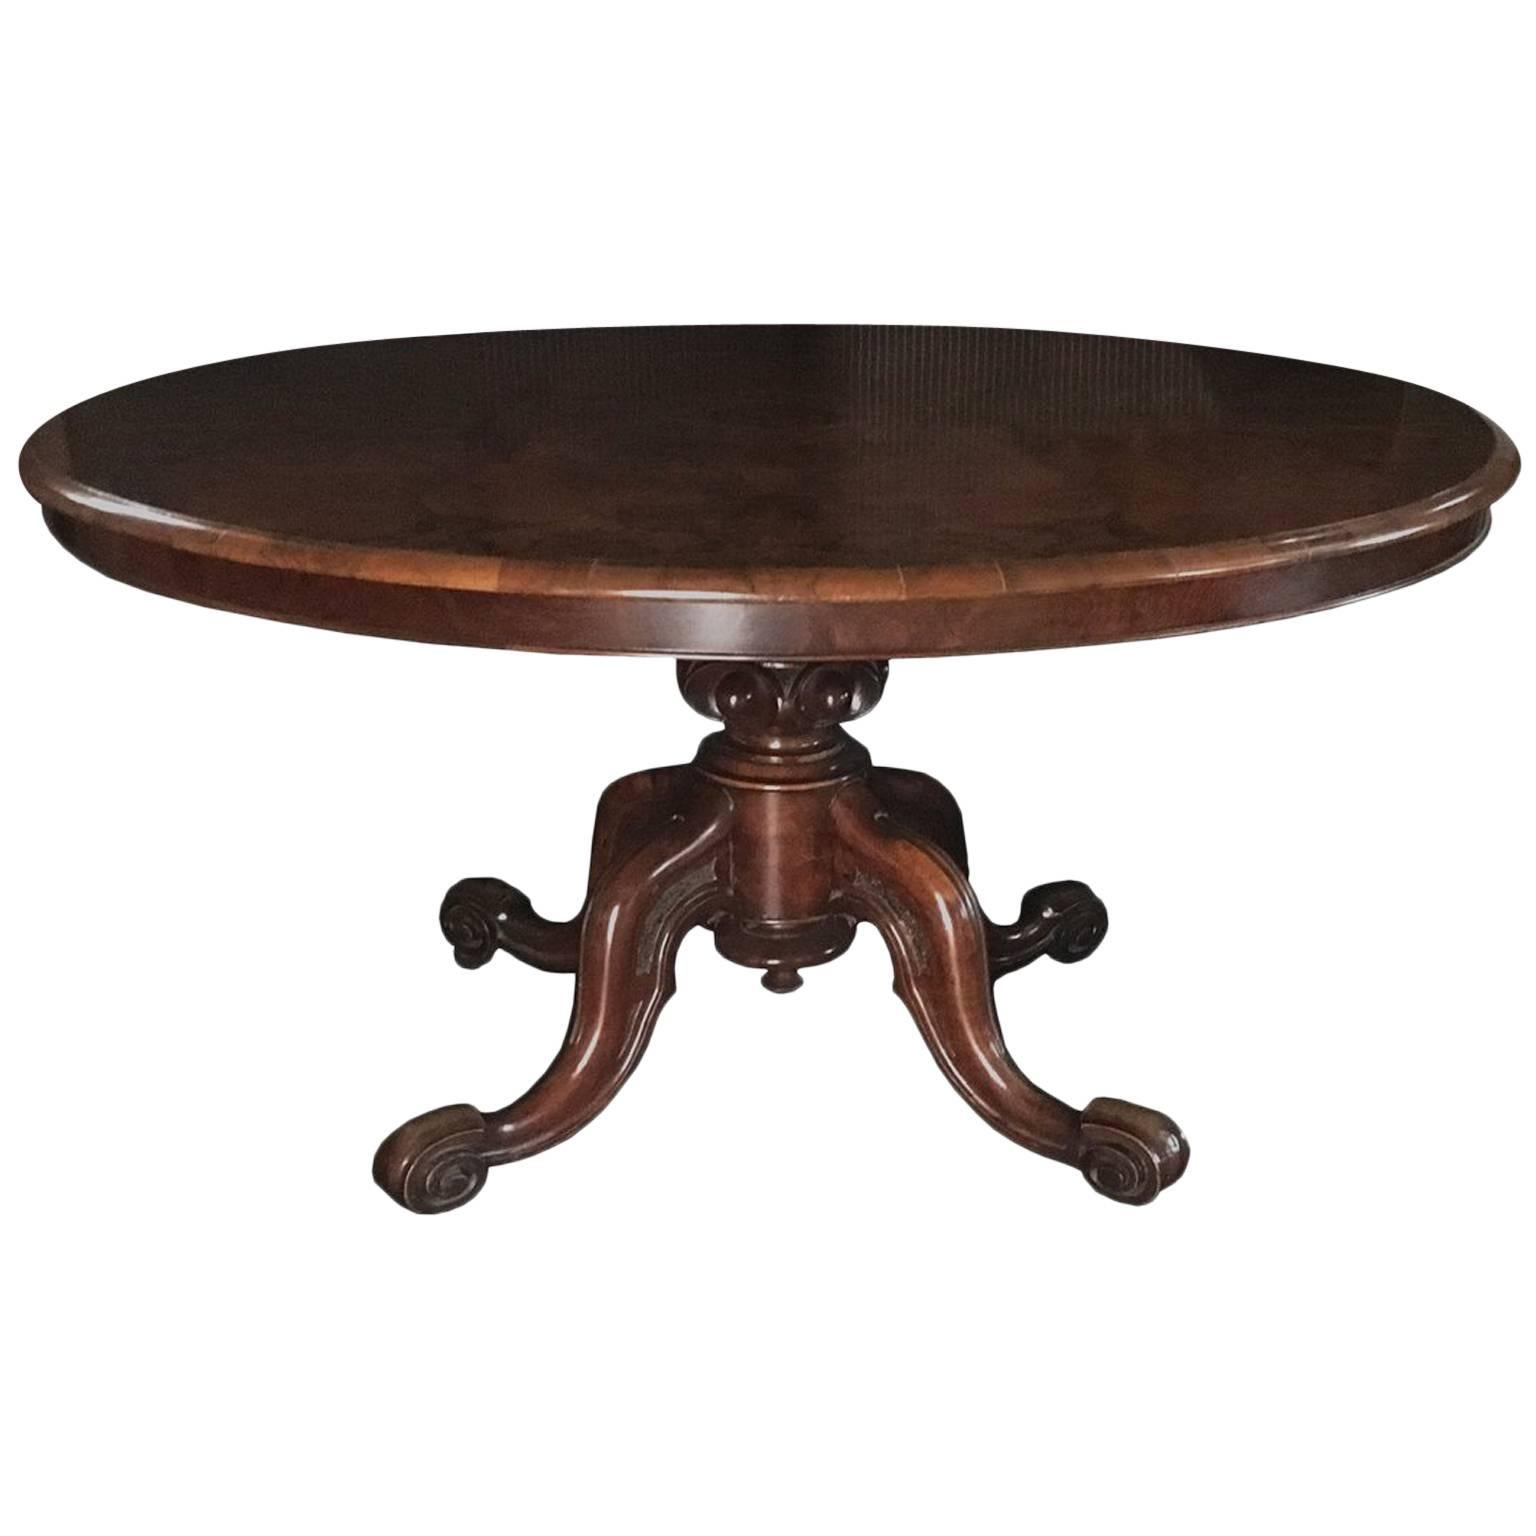 London Mid-19th Century Oval Walnut Tip Top Table by T H Filmer & Sons